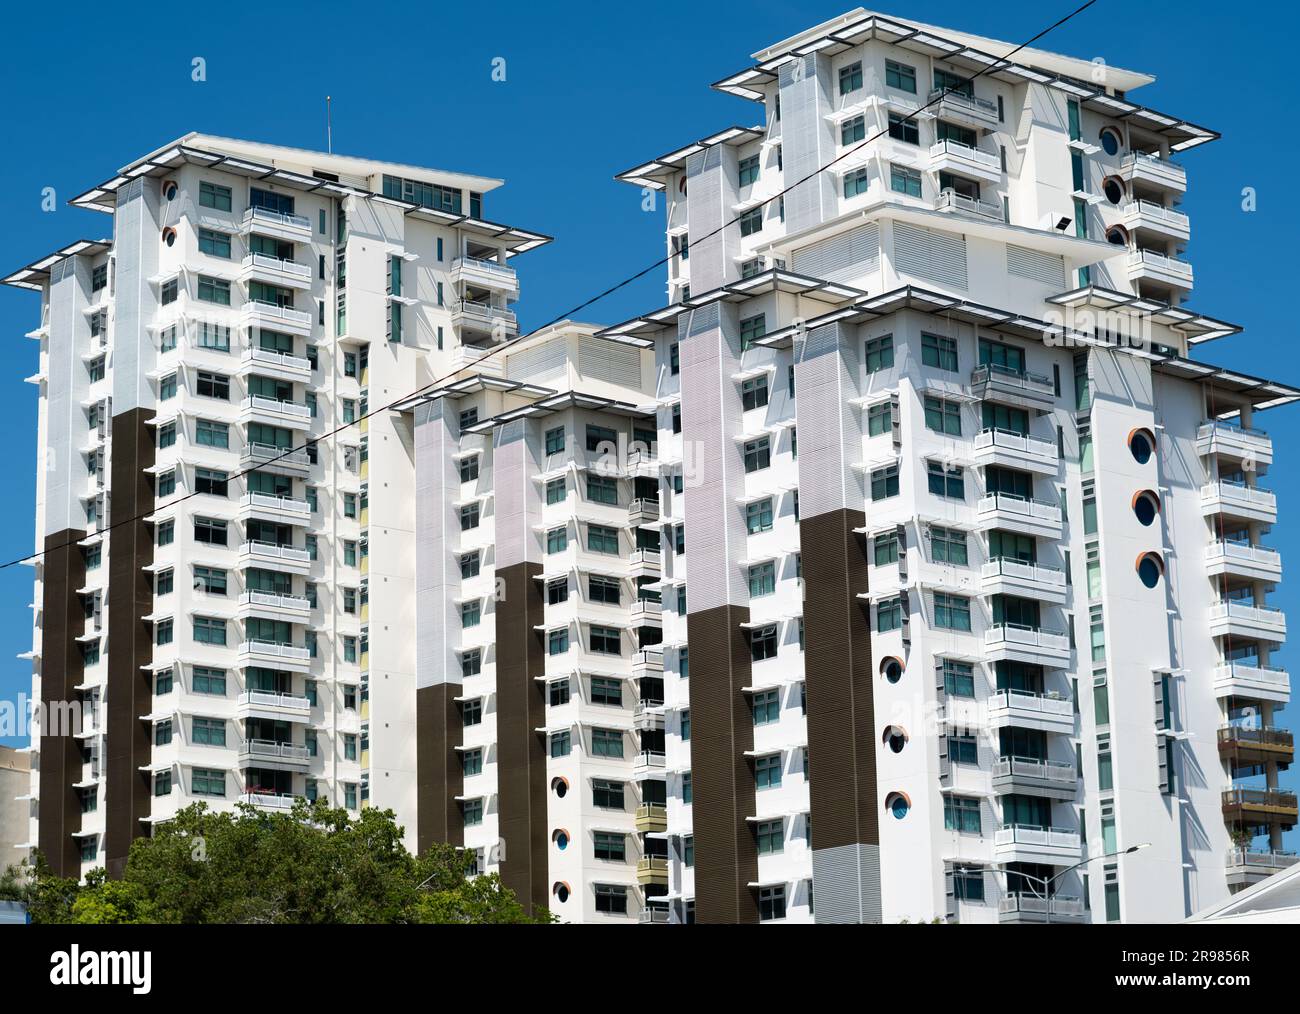 A photograph of a large multi block high-rise apartment complex, located in Darwin, and painted in white with bronze colored trimmings. Stock Photo